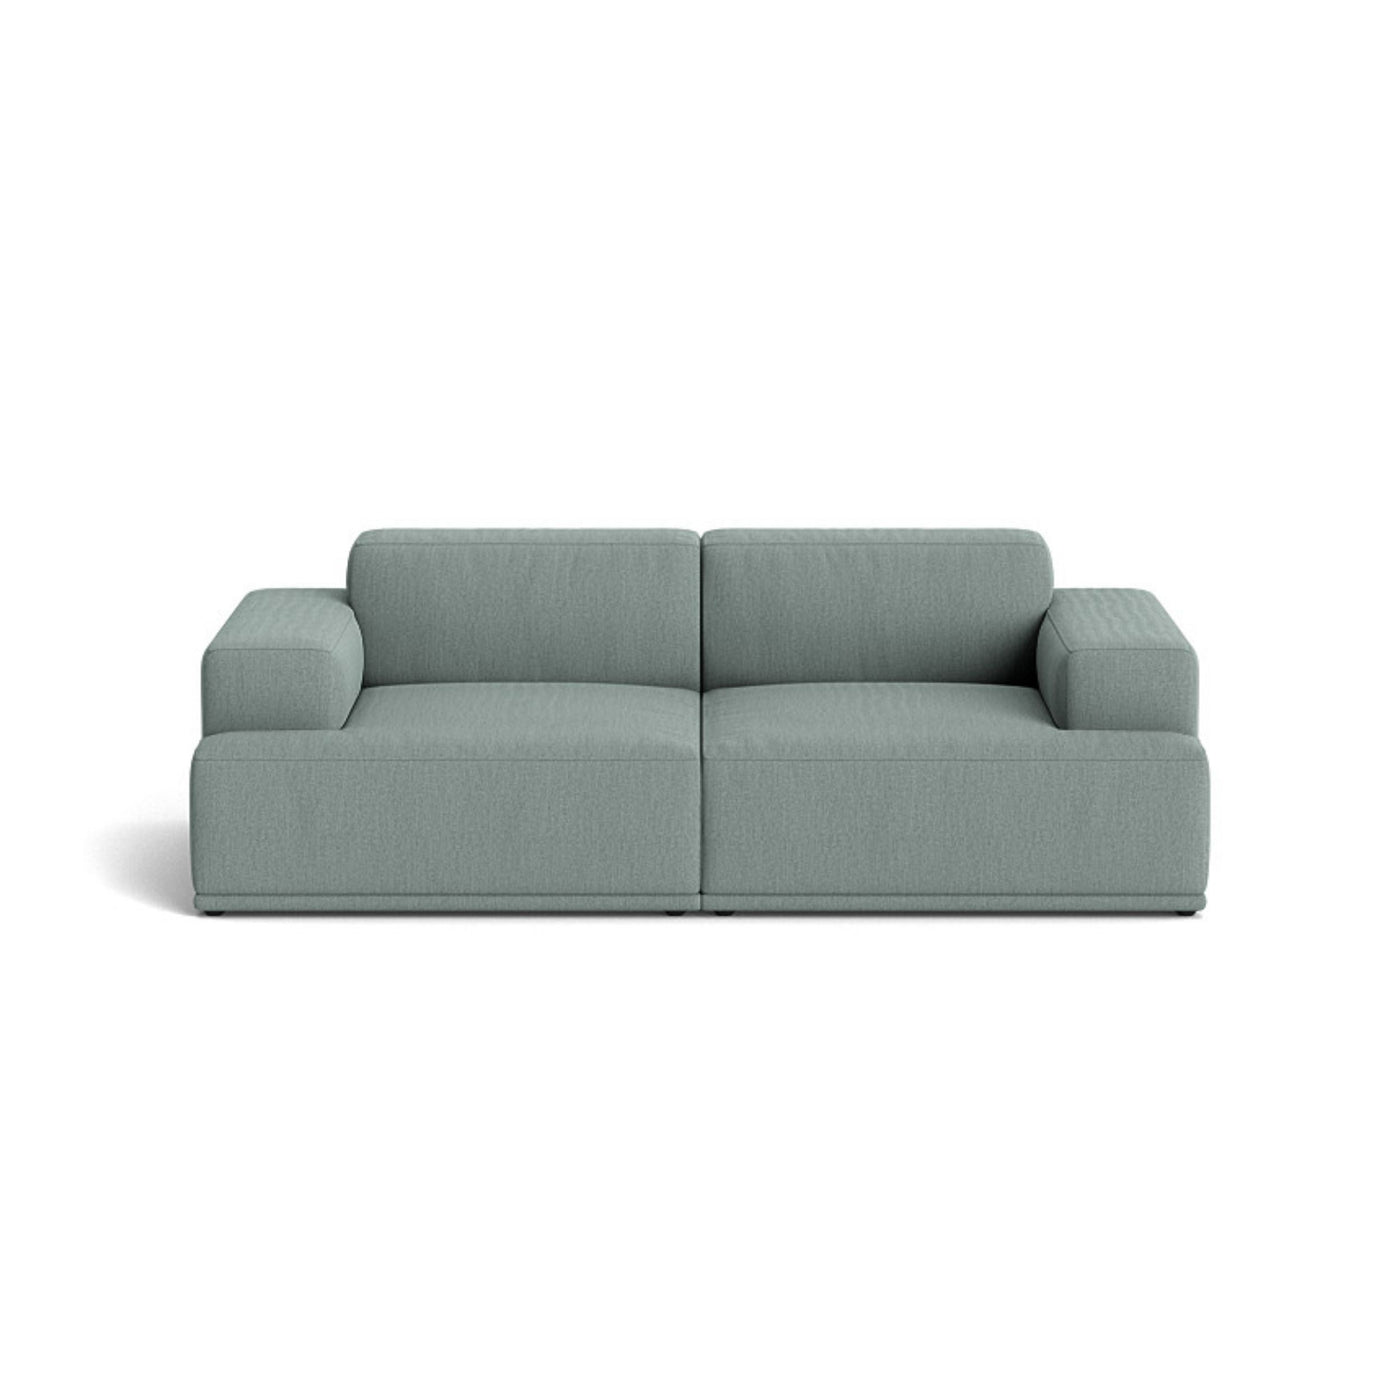 Muuto Connect Soft Modular 2 Seater Sofa, configuration 1. made-to-order from someday designs. #colour_re-wool-828